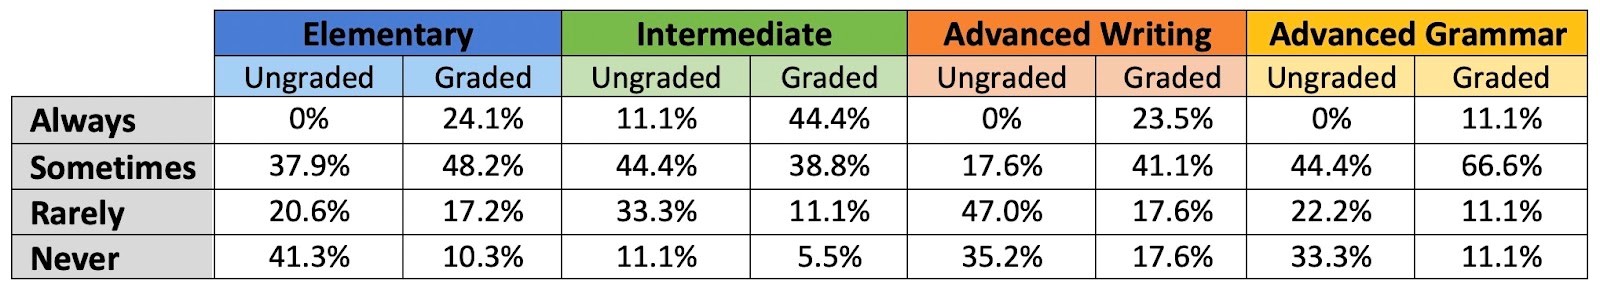 Picture 3 - How frequently do you use Machine Translation for spontaneous, ungraded speaking tasks vs. graded speaking tasks during a Zoom class? - elementary always - ungraded 0, graded 24.1; elementary sometimes ungraded 37.9, graded 48.2; elementary rarely ungraded 20.6, graded 17.2; elementary never ungraded 41.3, graded 10.3; intermediate always ungraded - 11.1, graded 44.4; intermediate sometimes ungraded - 44.4, graded 38.8; intermediate rarely ungraded 33.3, graded 11.1; intermediate never ungraded 11.1, graded 5.5; advanced writing always ungraded 0, graded 23.5; advanced writing sometimes ungraded 17.6, graded 41.1; advanced writing rarely ungraded 47, graded 17.6; advanced writing never ungraded 35.2, graded 17.6; advanced grammar always ungraded 0, graded 11.1; advanced grammar sometimes ungraded 44.4, graded 66.6; advanced grammar rarely ungraded 22.2, graded 11.1; advanced grammar never ungraded 33.3, graded 11.1